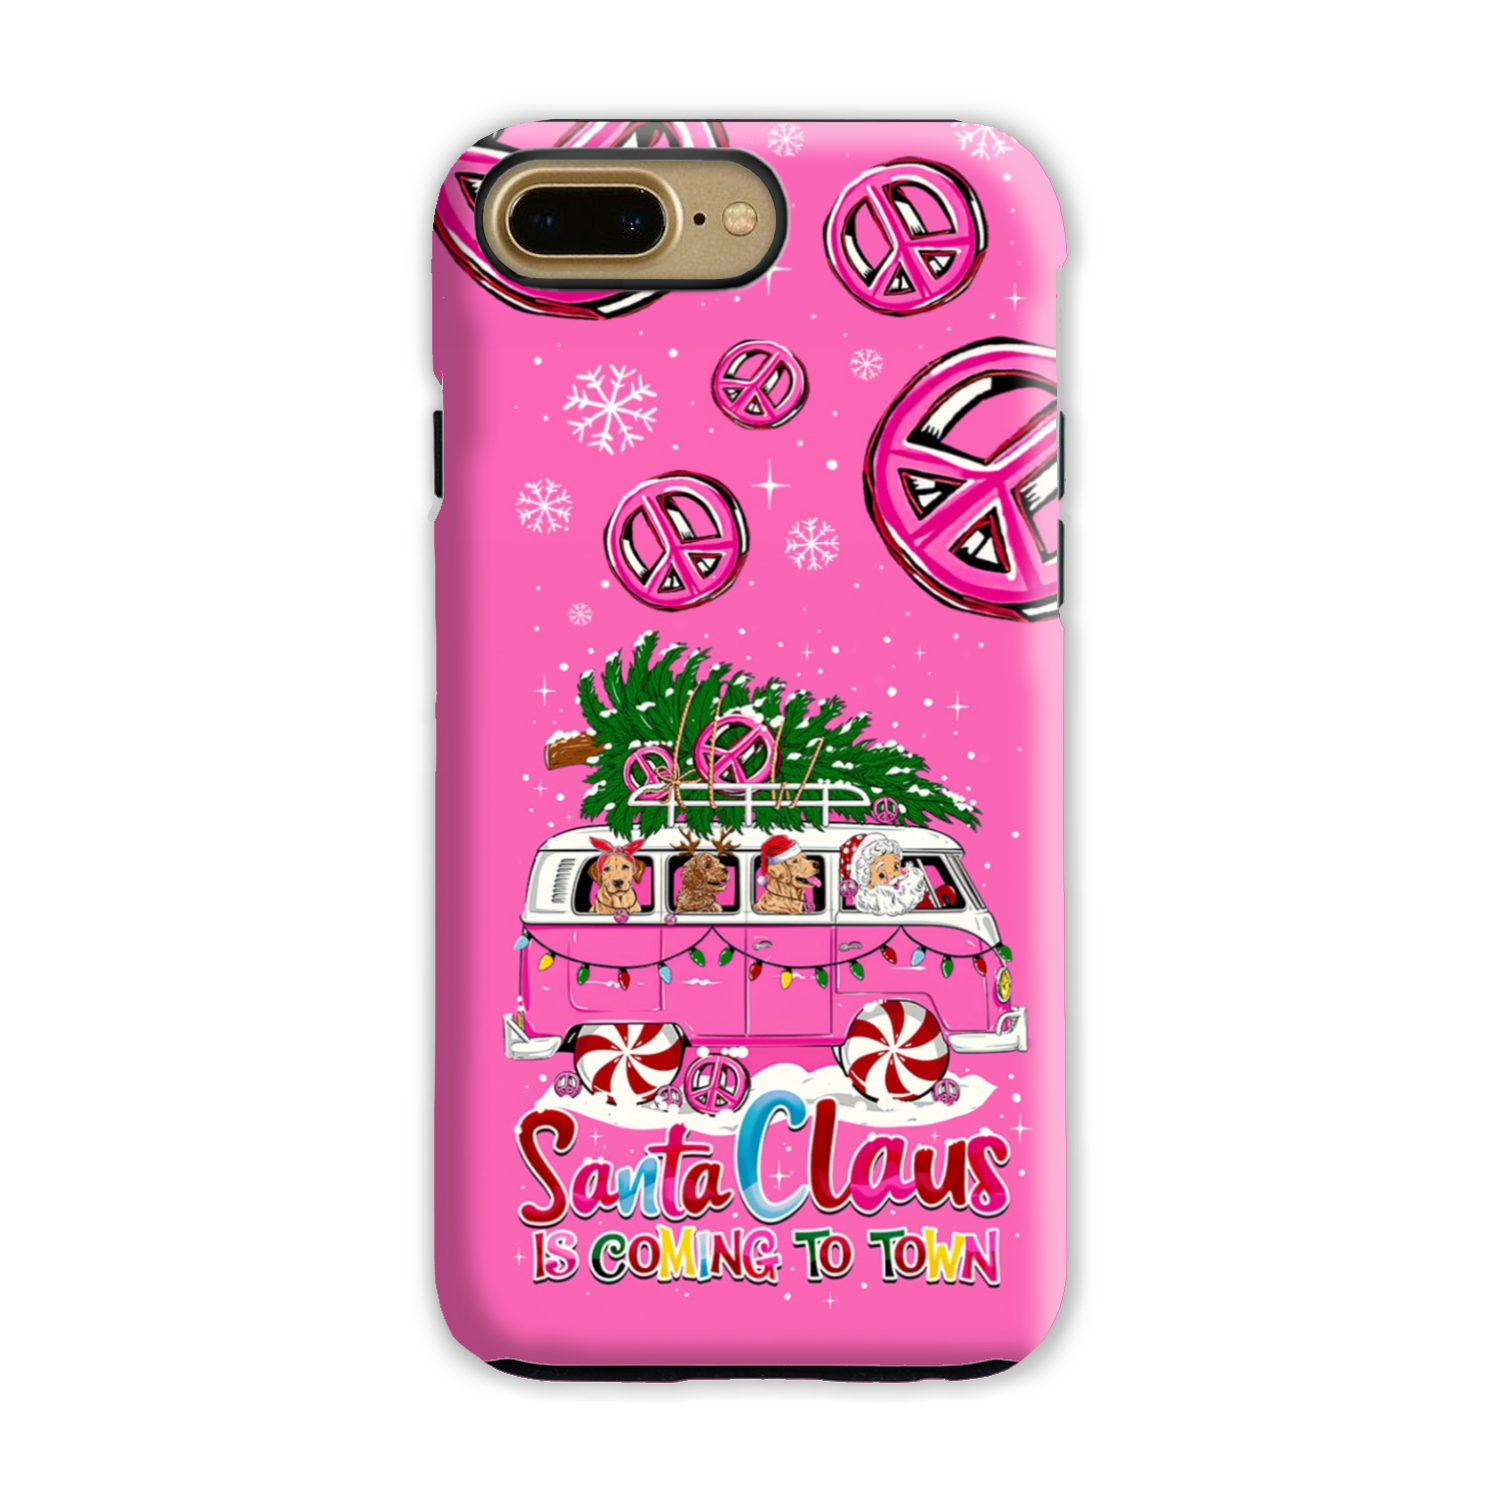 SANTA CLAUS IS COMING CHRISTMAS PHONE CASE - TY2310232